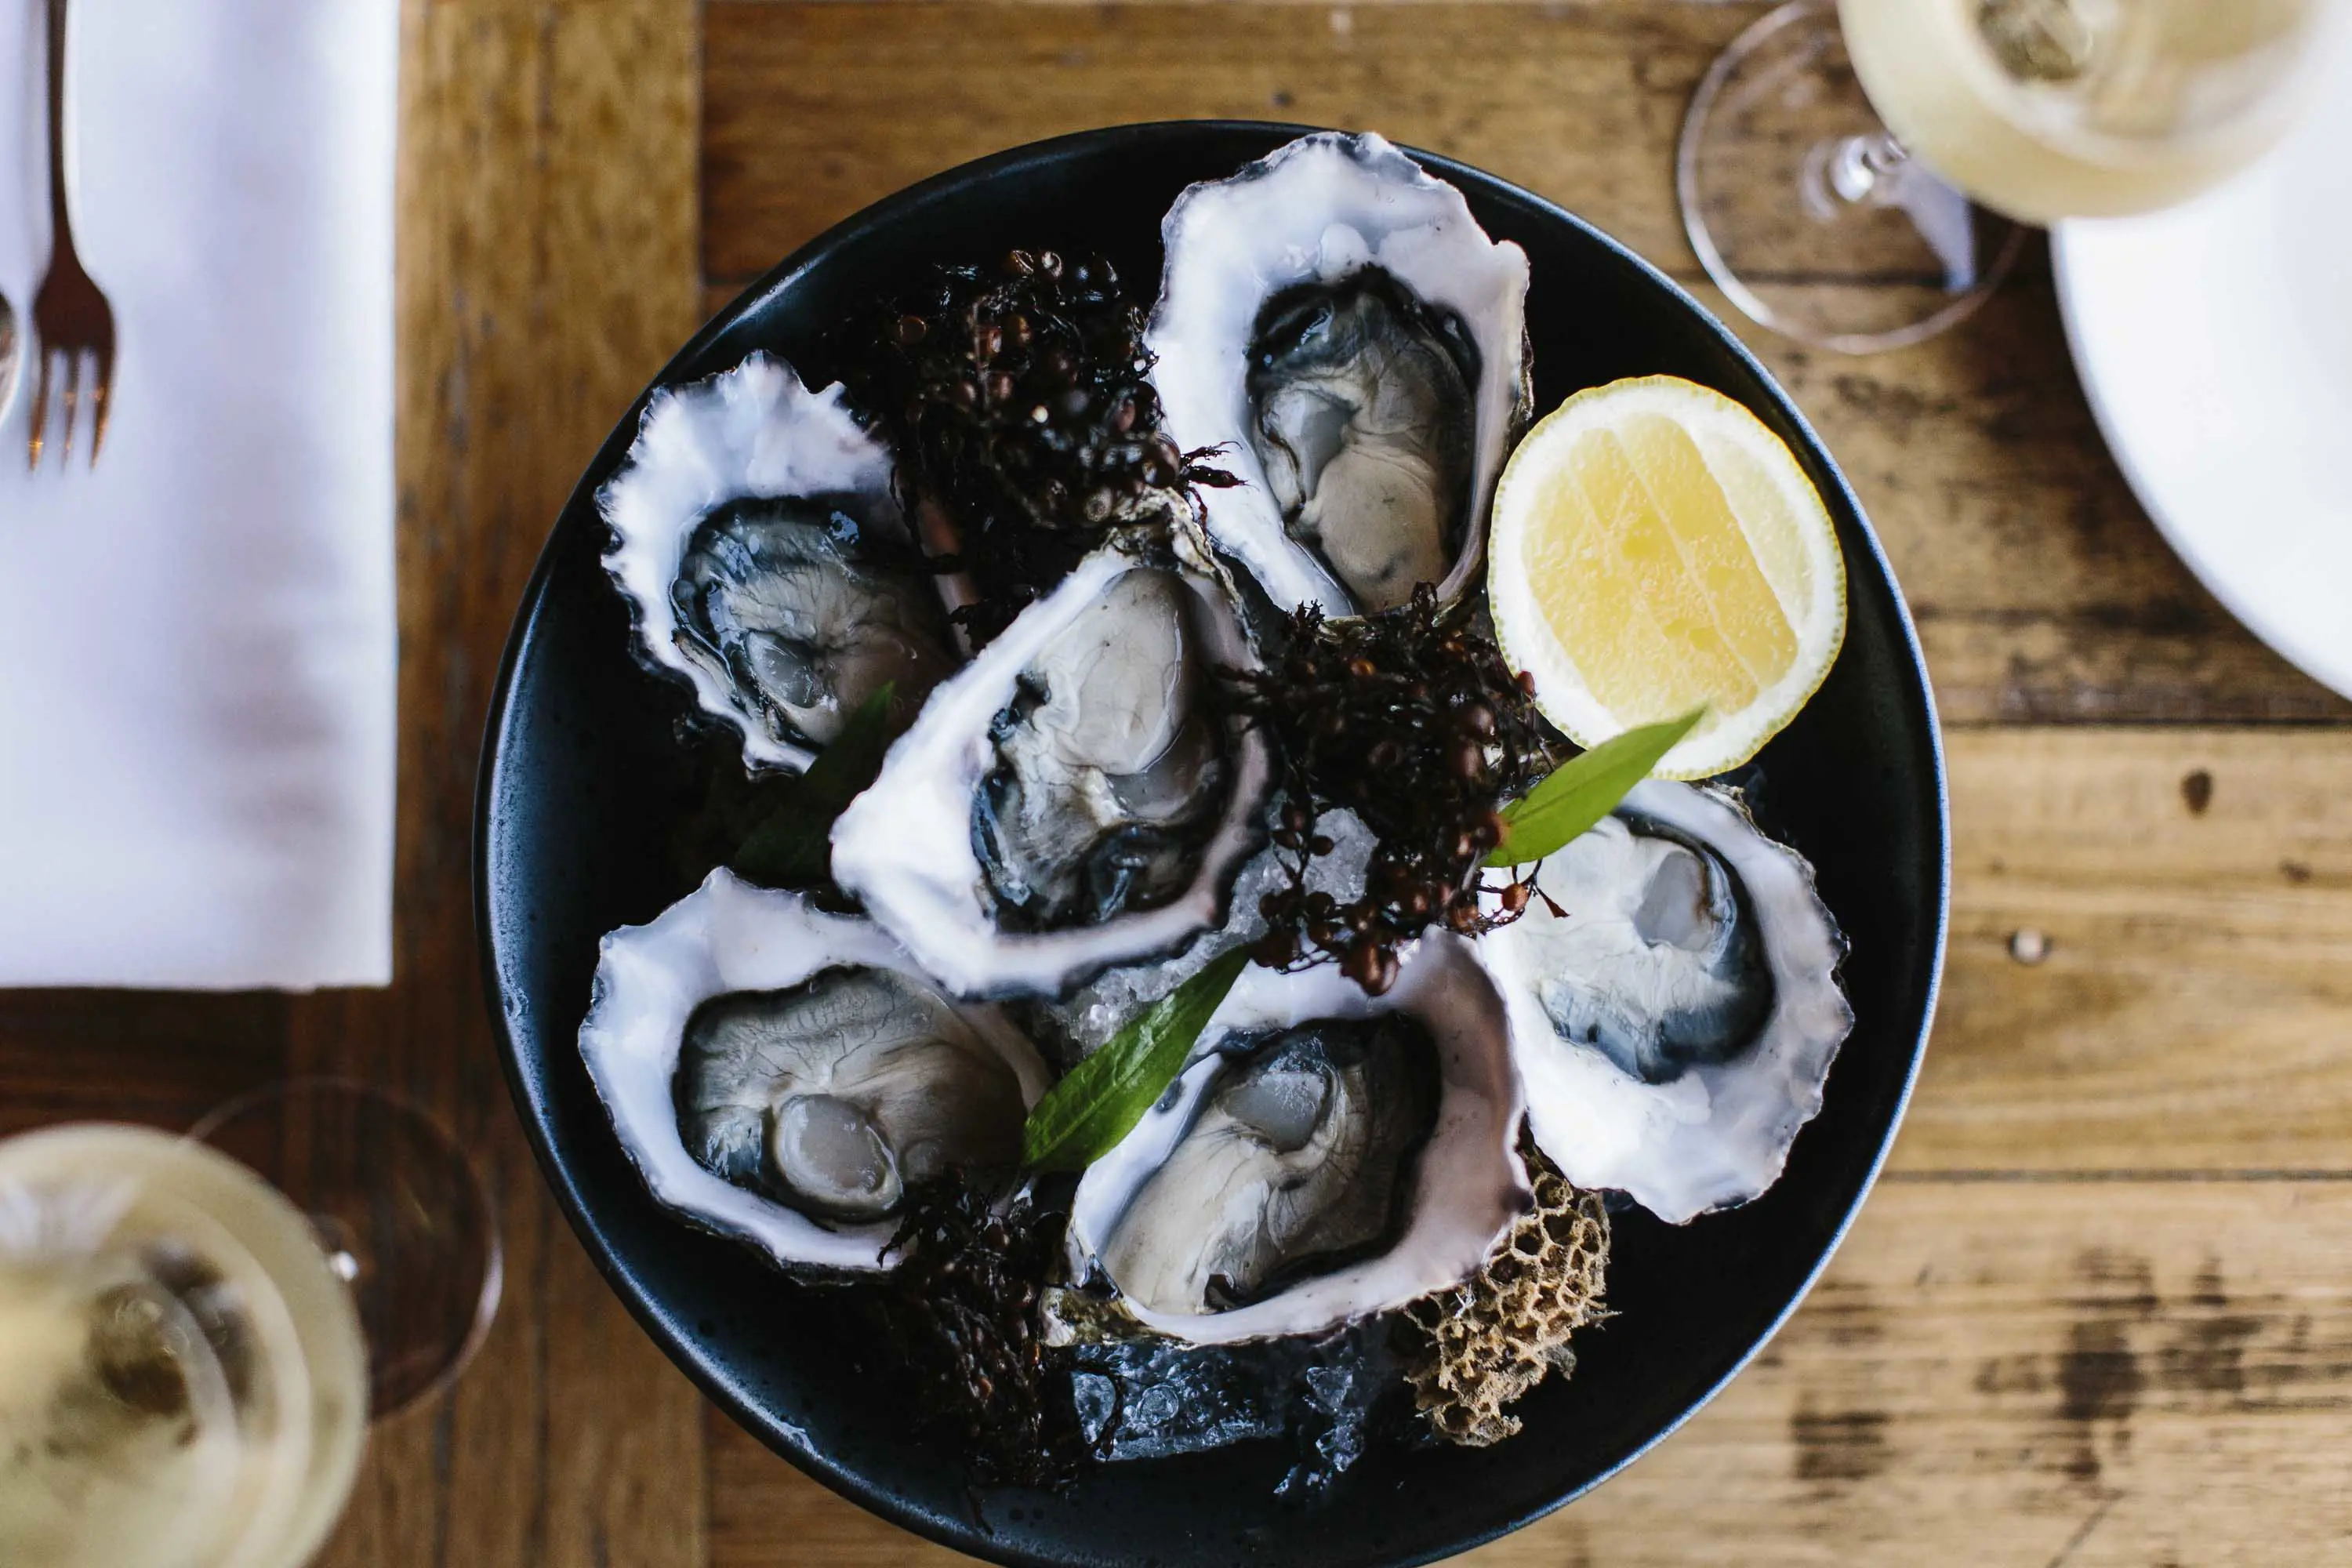 A plate of fresh oysters with garnish and a slice of lemon, presented on a black plate sitting on a wooden table.